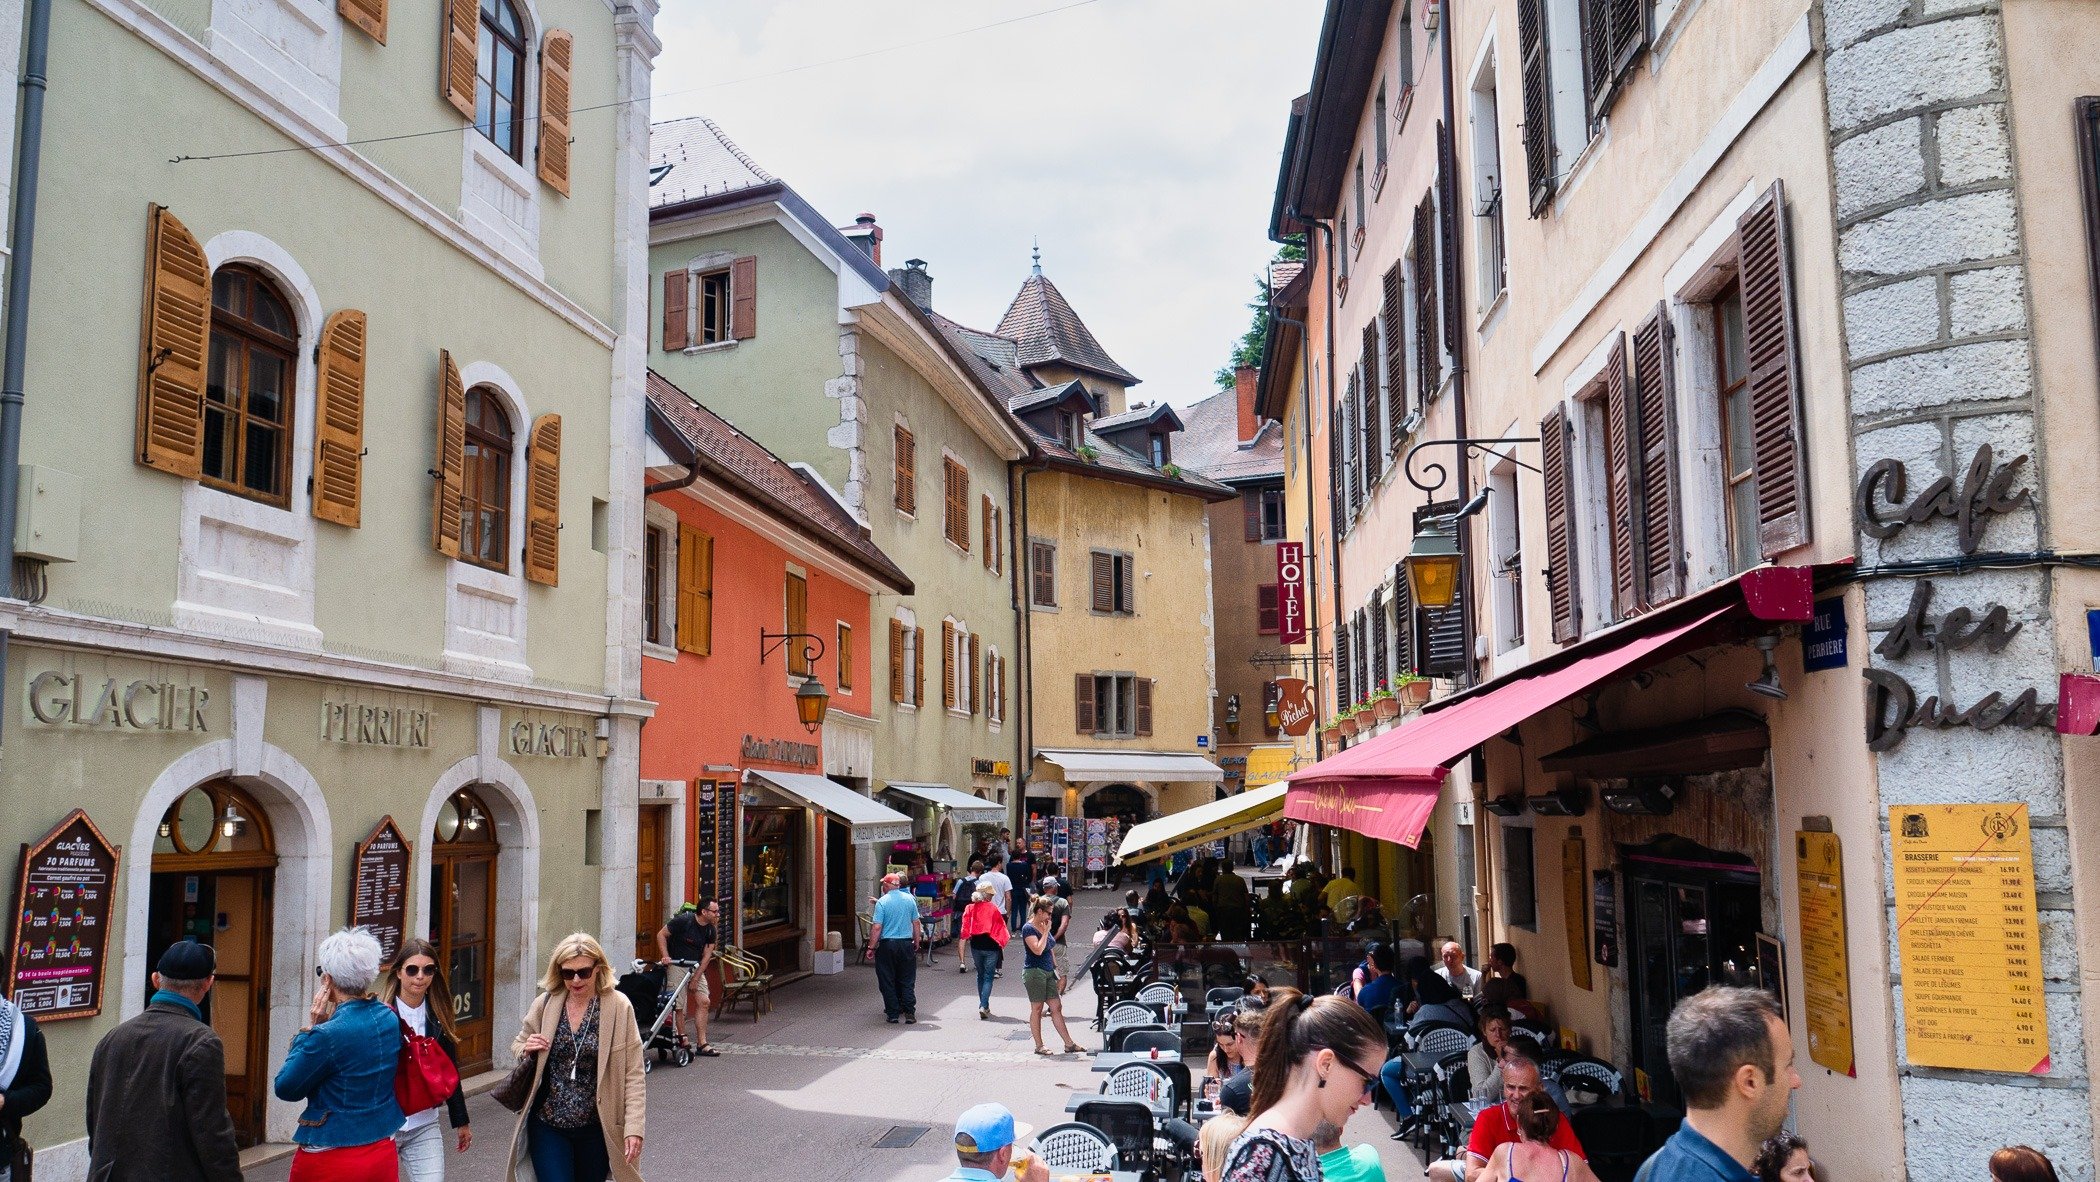  The old town at Annecy is full of places to eat.